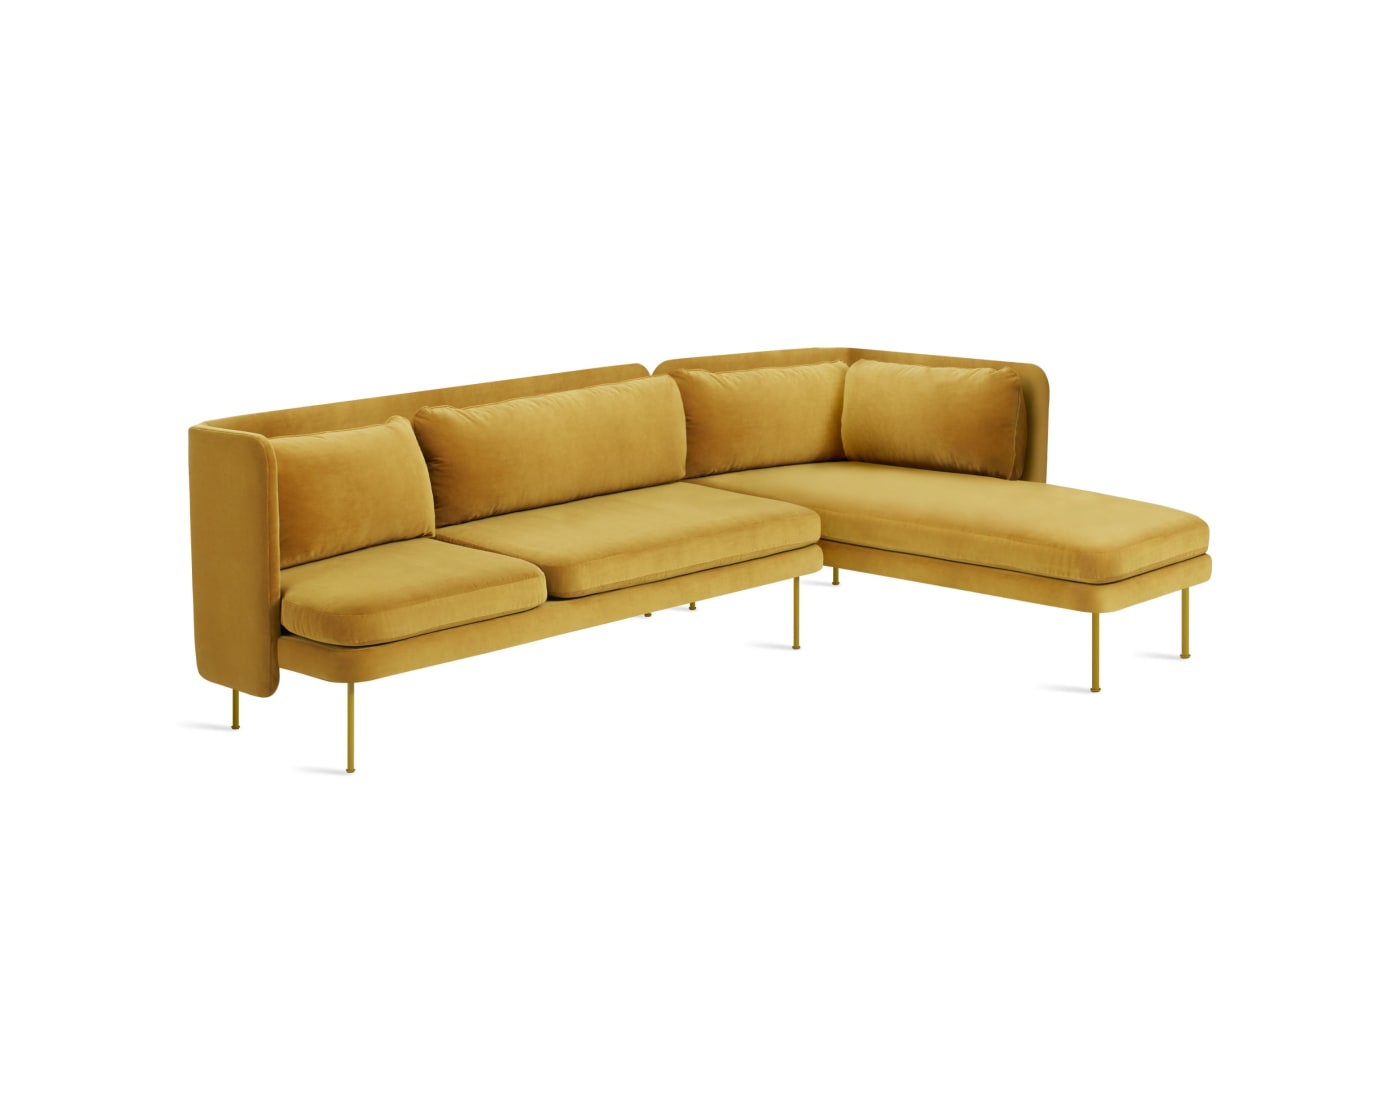 Bloke Sofa with Chaise